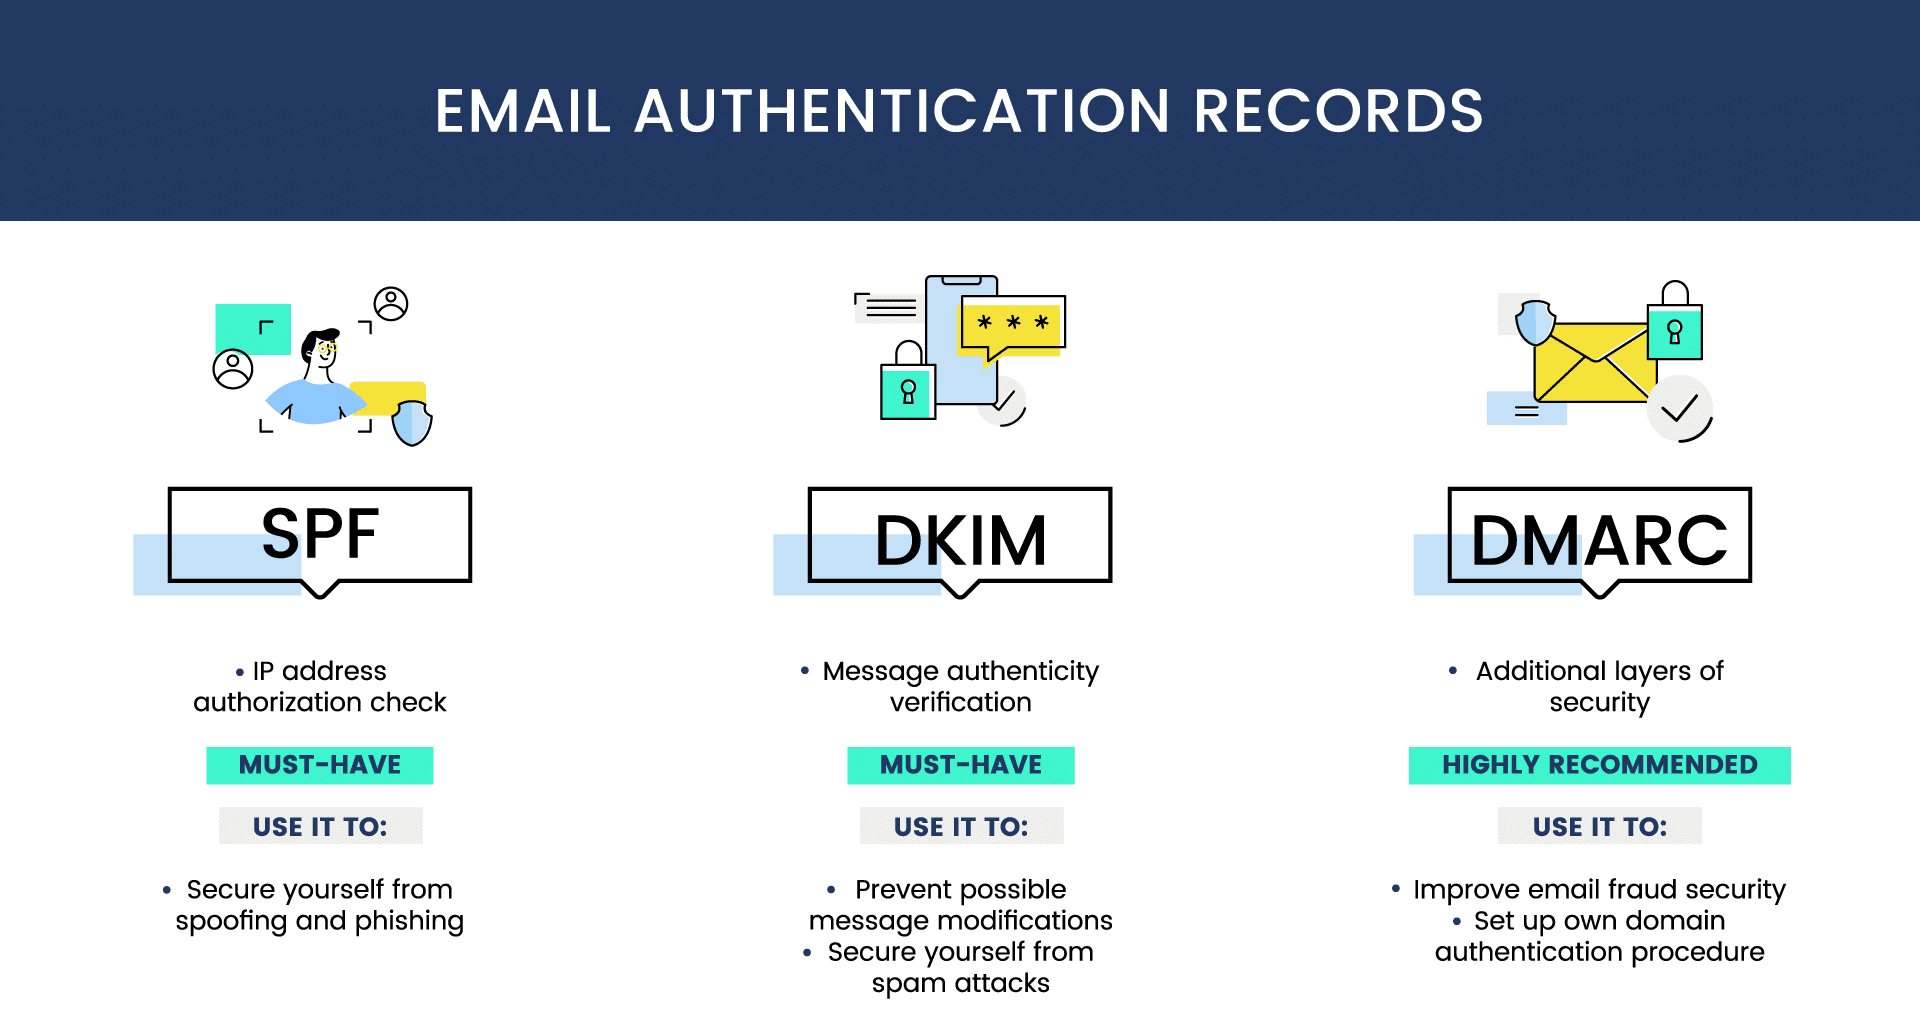 DMARC - Email Authentication Records